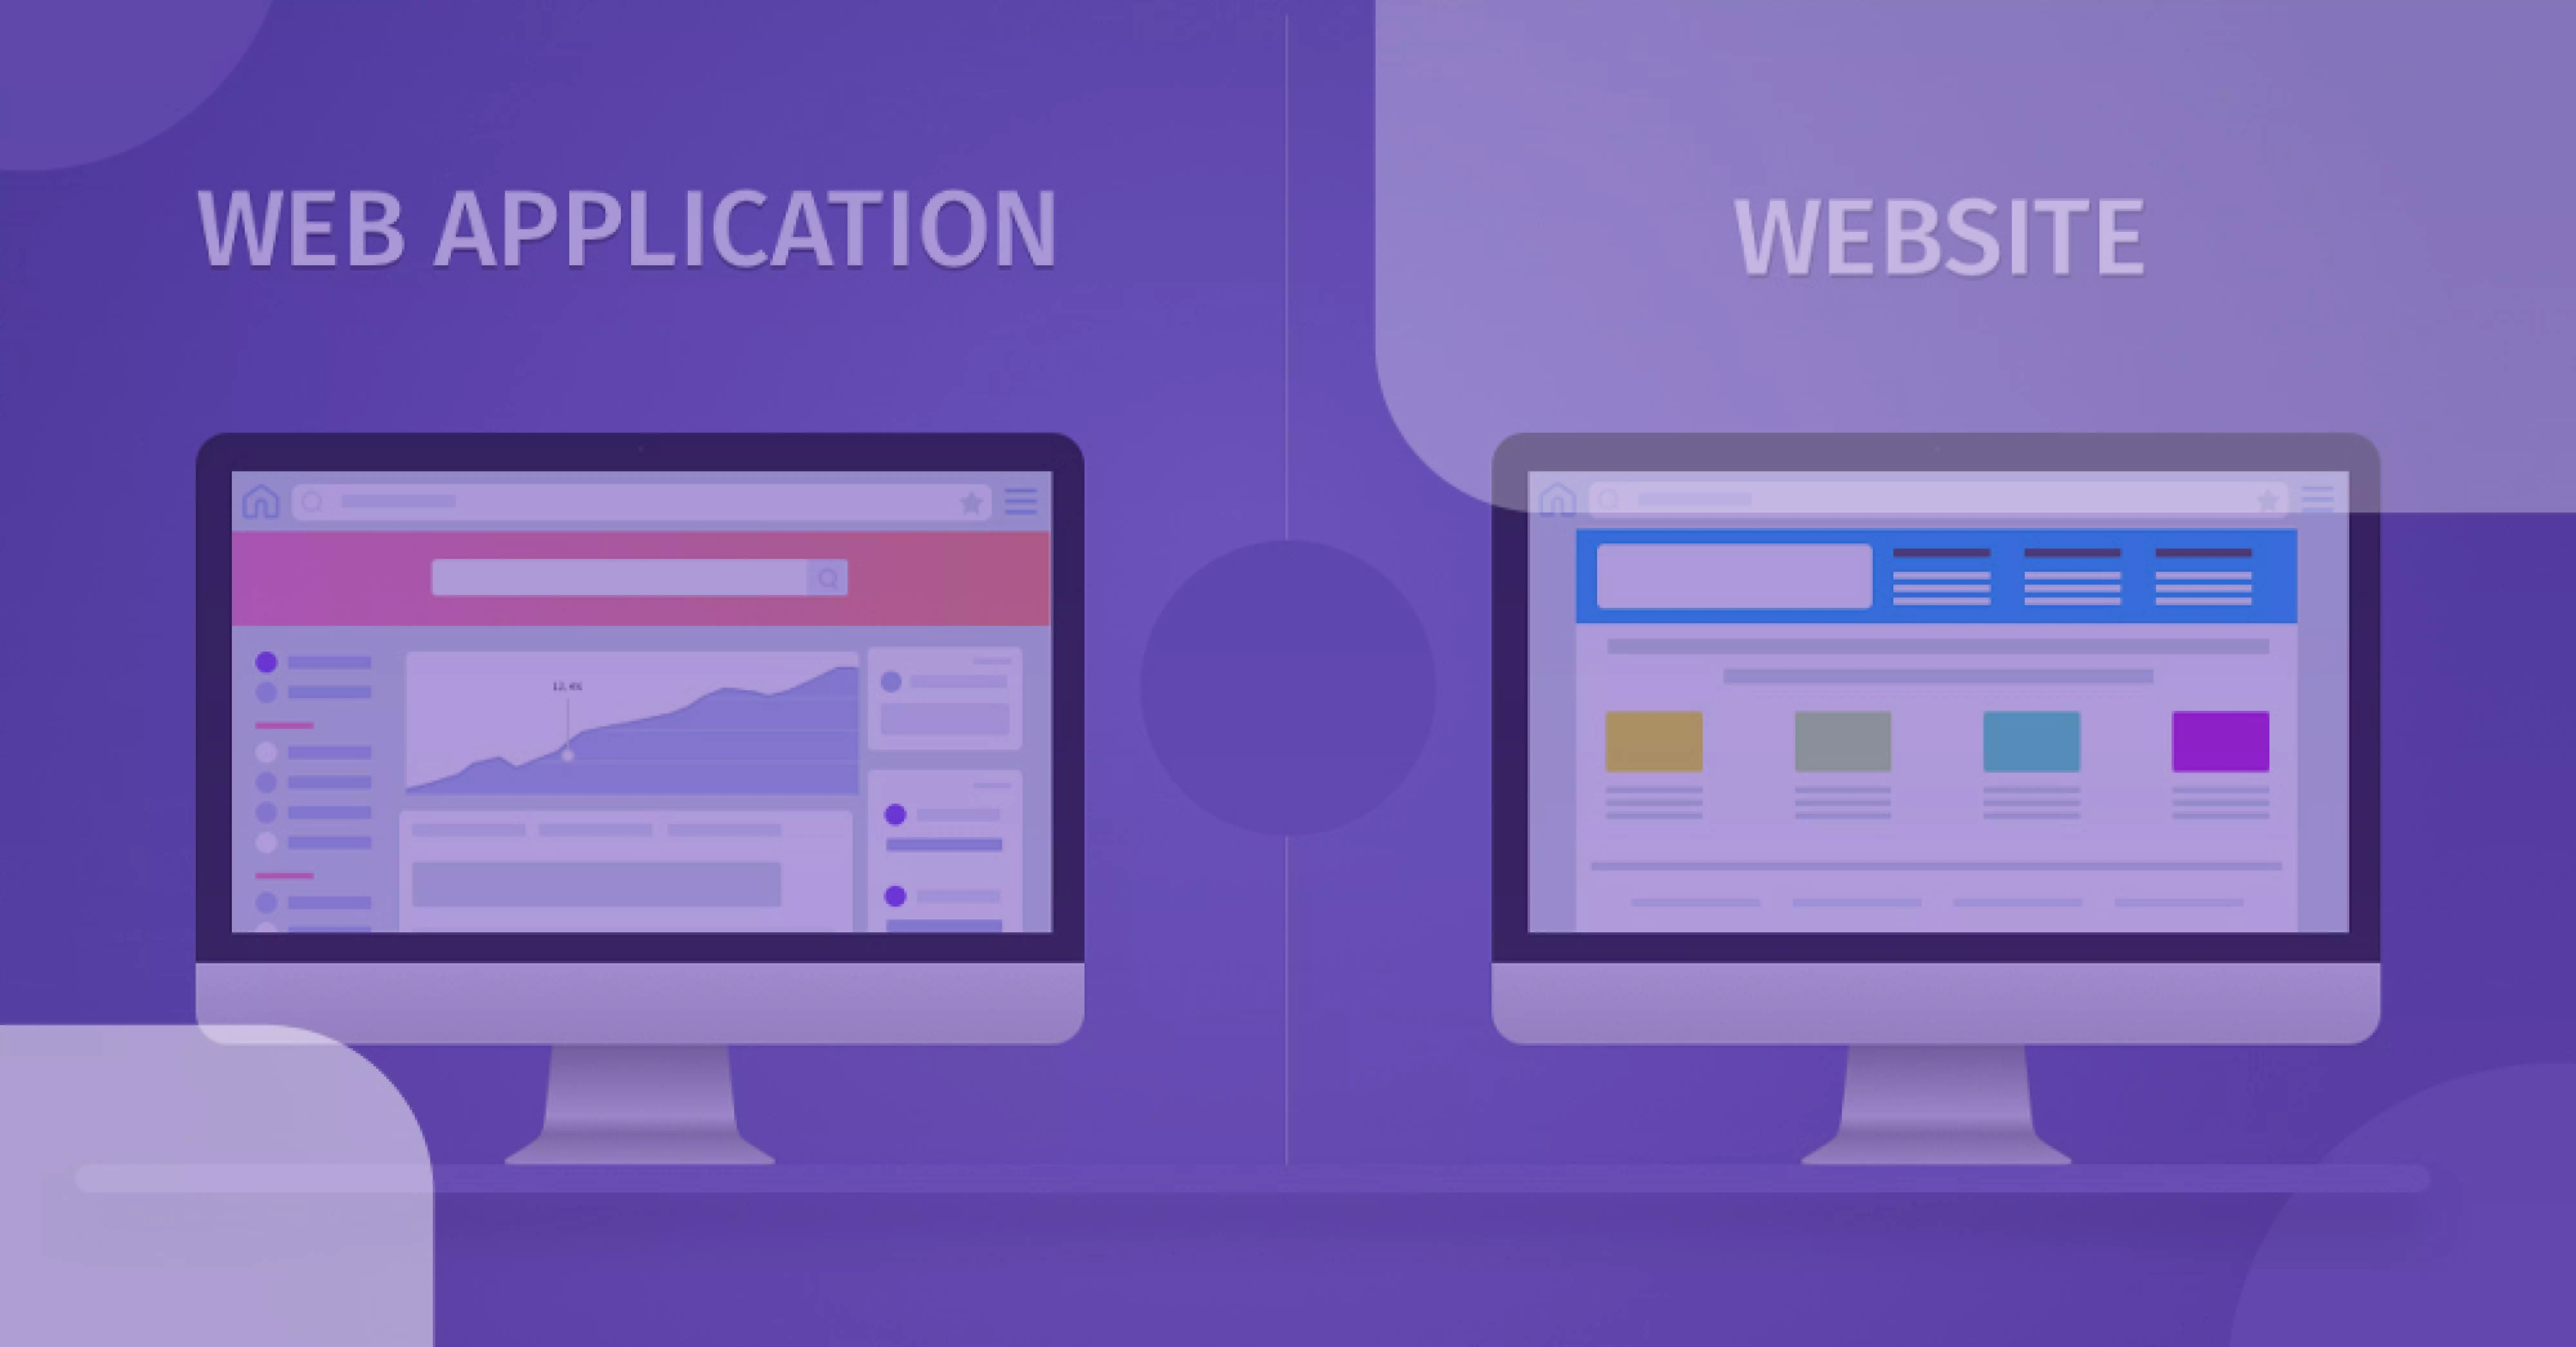 Difference Between Web App And Website